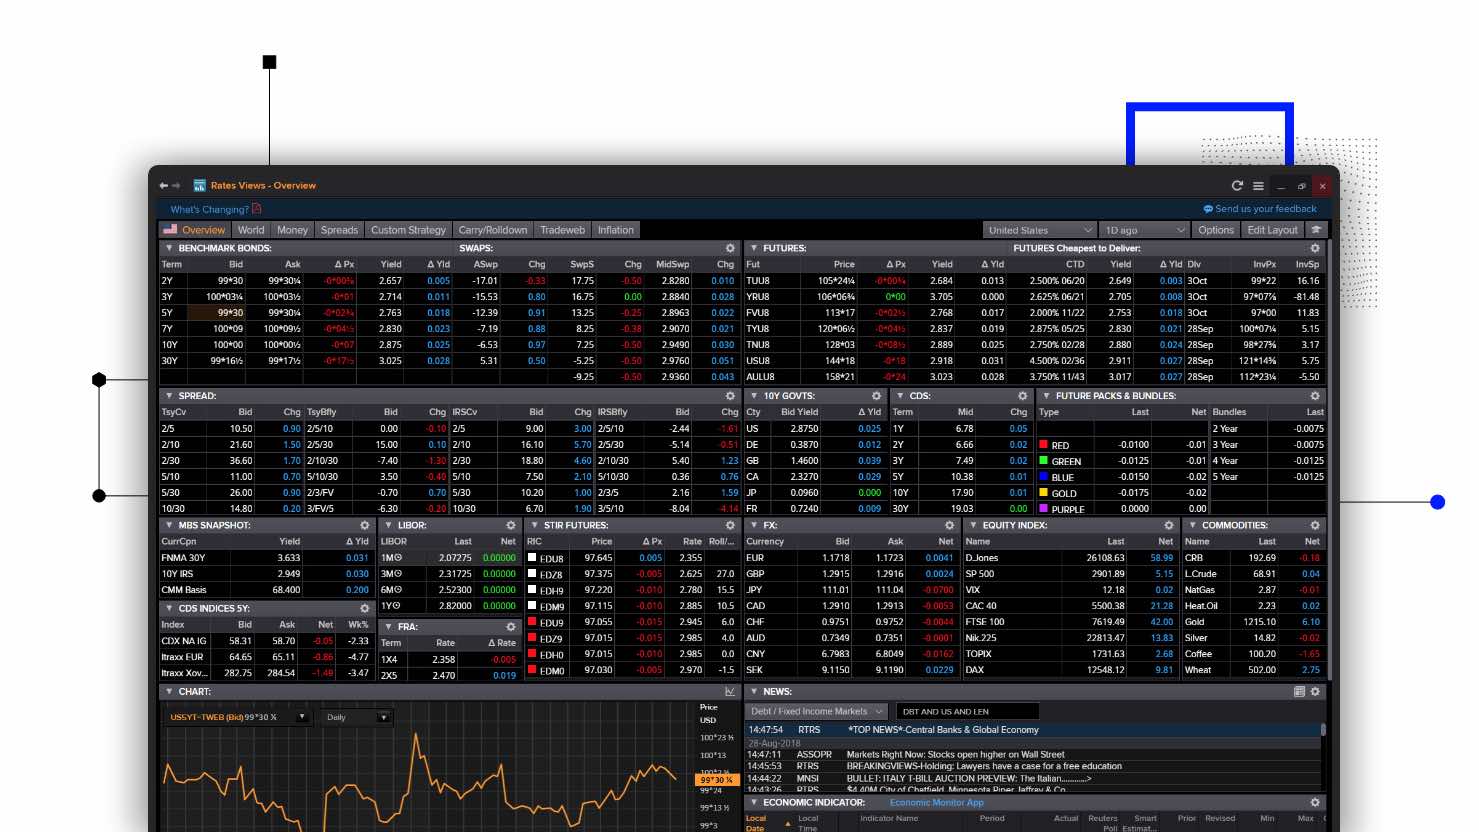 Eikon for fixed income: providing consolidated views of critical benchmark rates markets